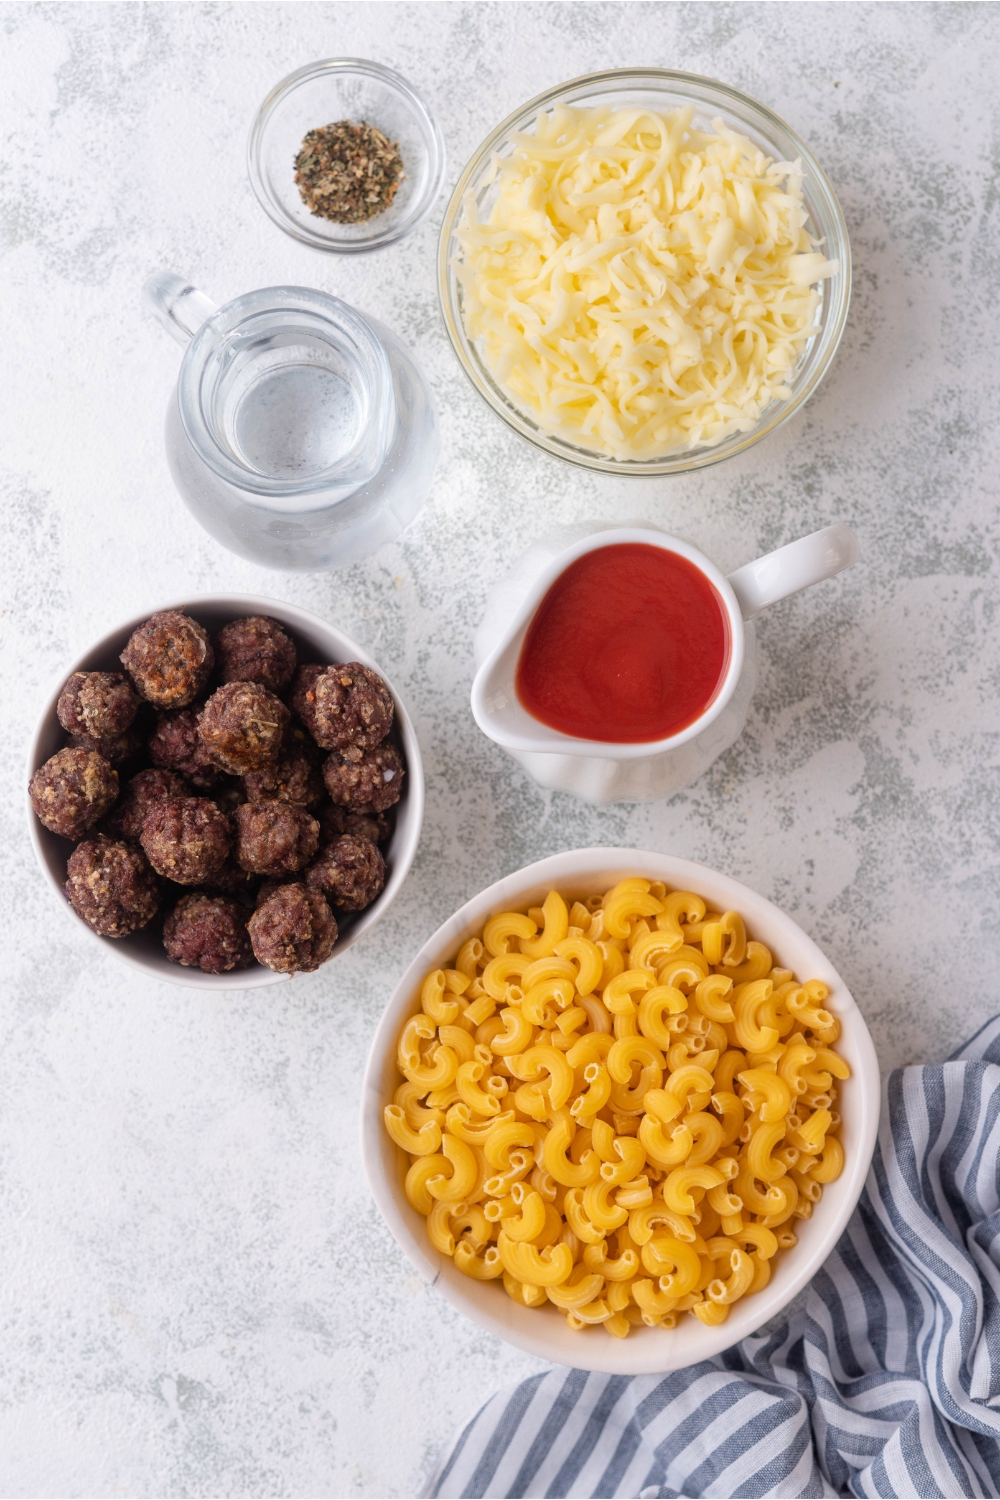 An assortment of ingredients including bowls of meatballs, elbow macaroni, shredded cheese, water, seasoning, and tomato sauce.